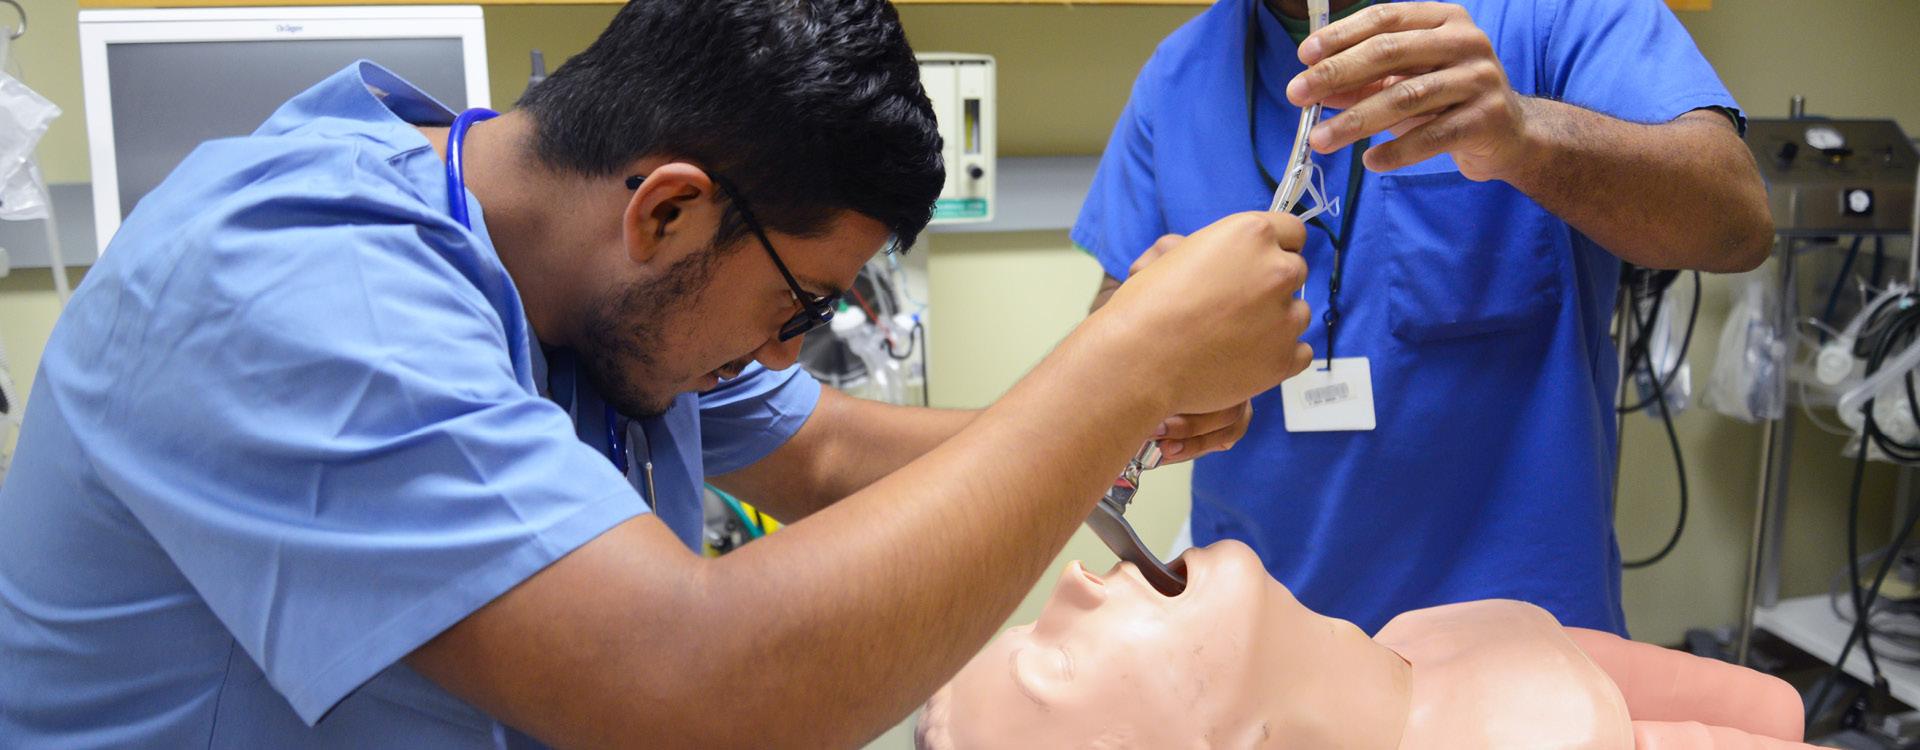 Respiratory therapy student practicing intubating a dummy